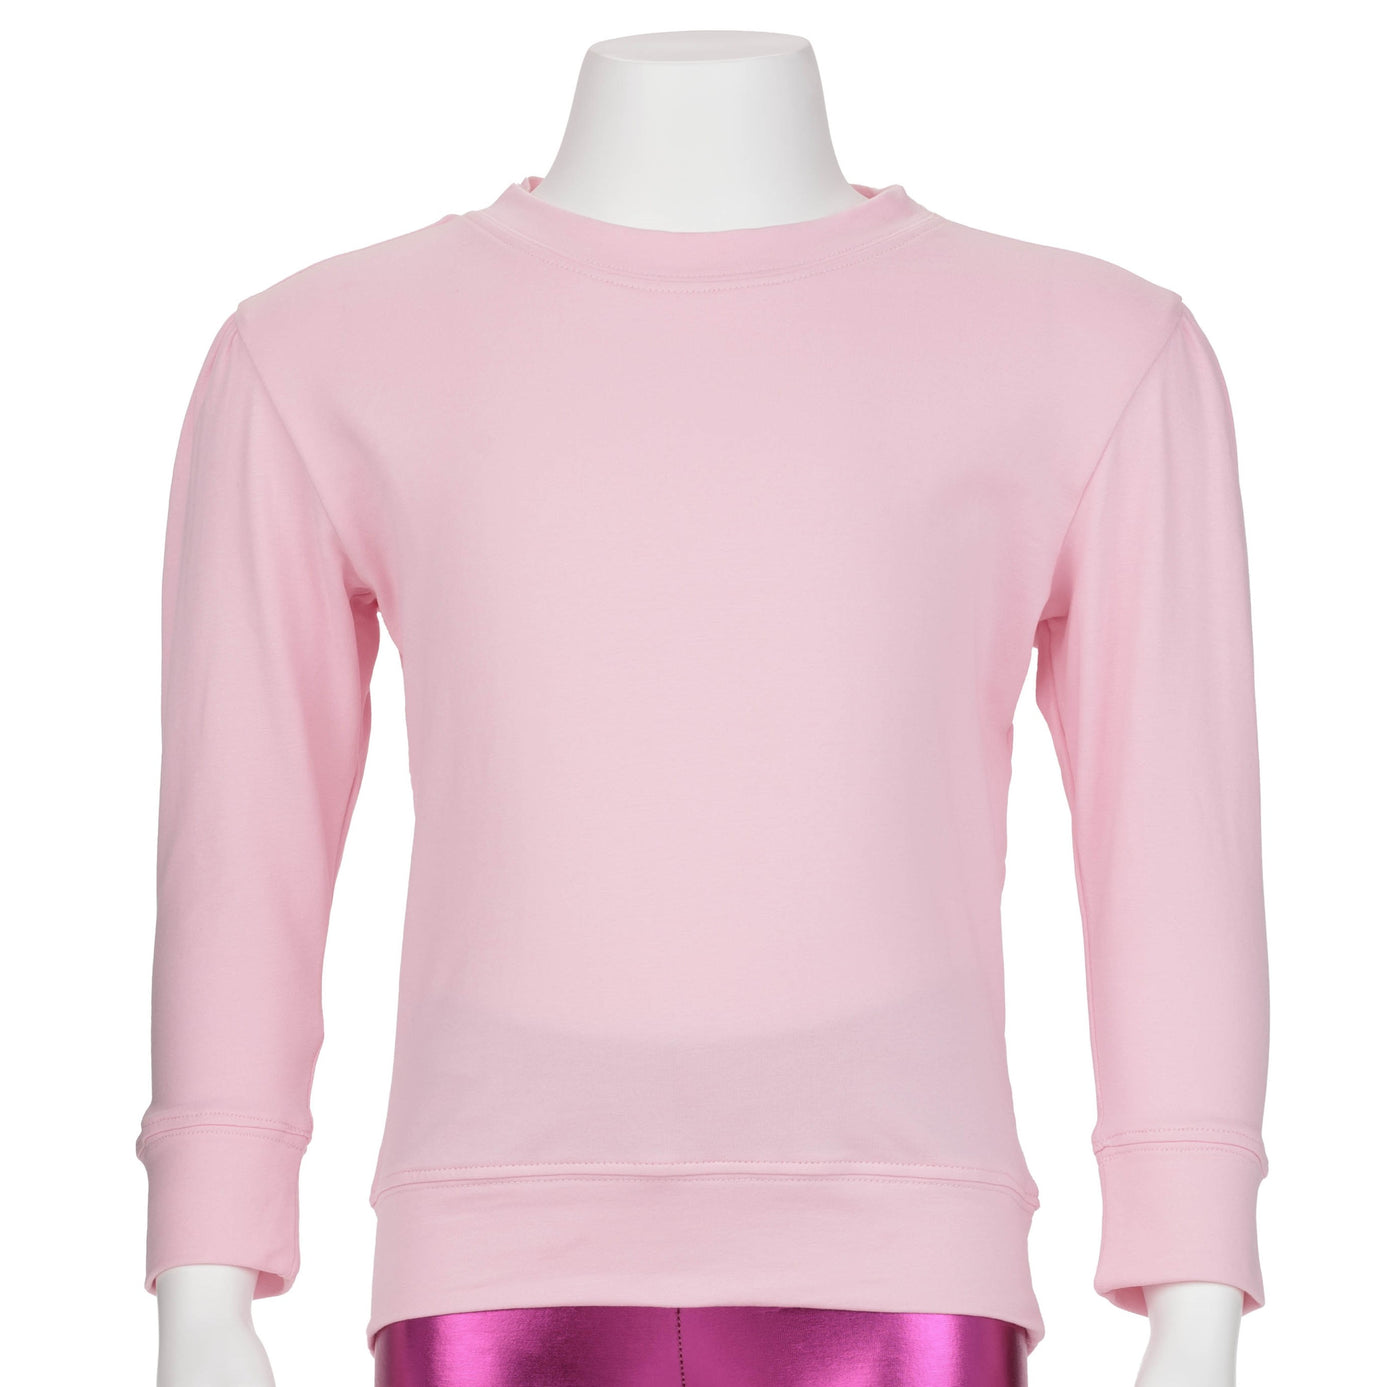 Holly Sweatshirt in Light Pink French Terry